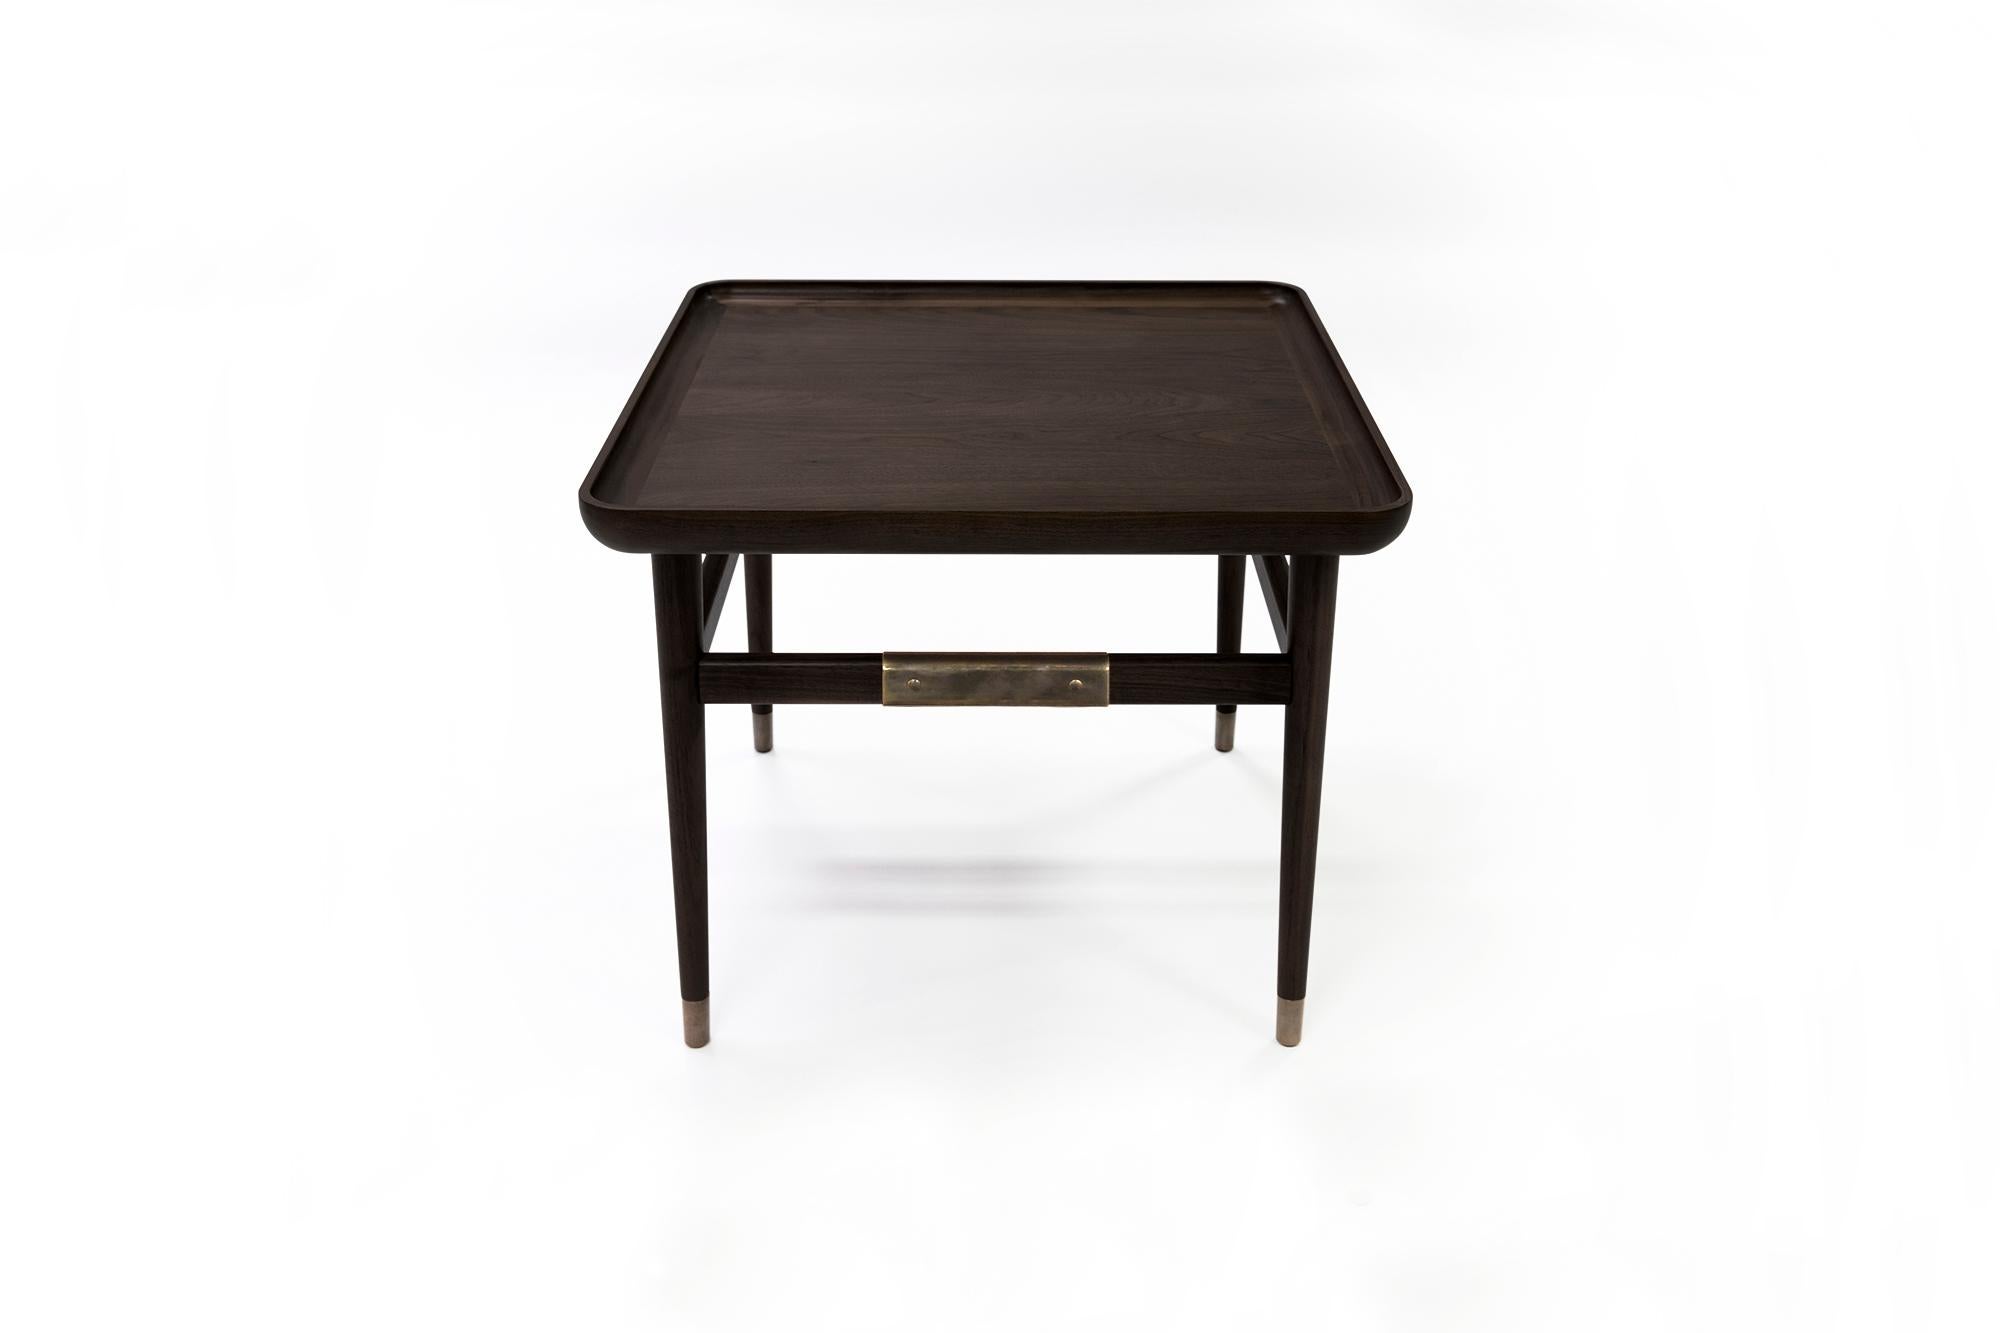 American Oslo Rectangular Side Table in Ebonized Walnut with Antique Brass Fittings